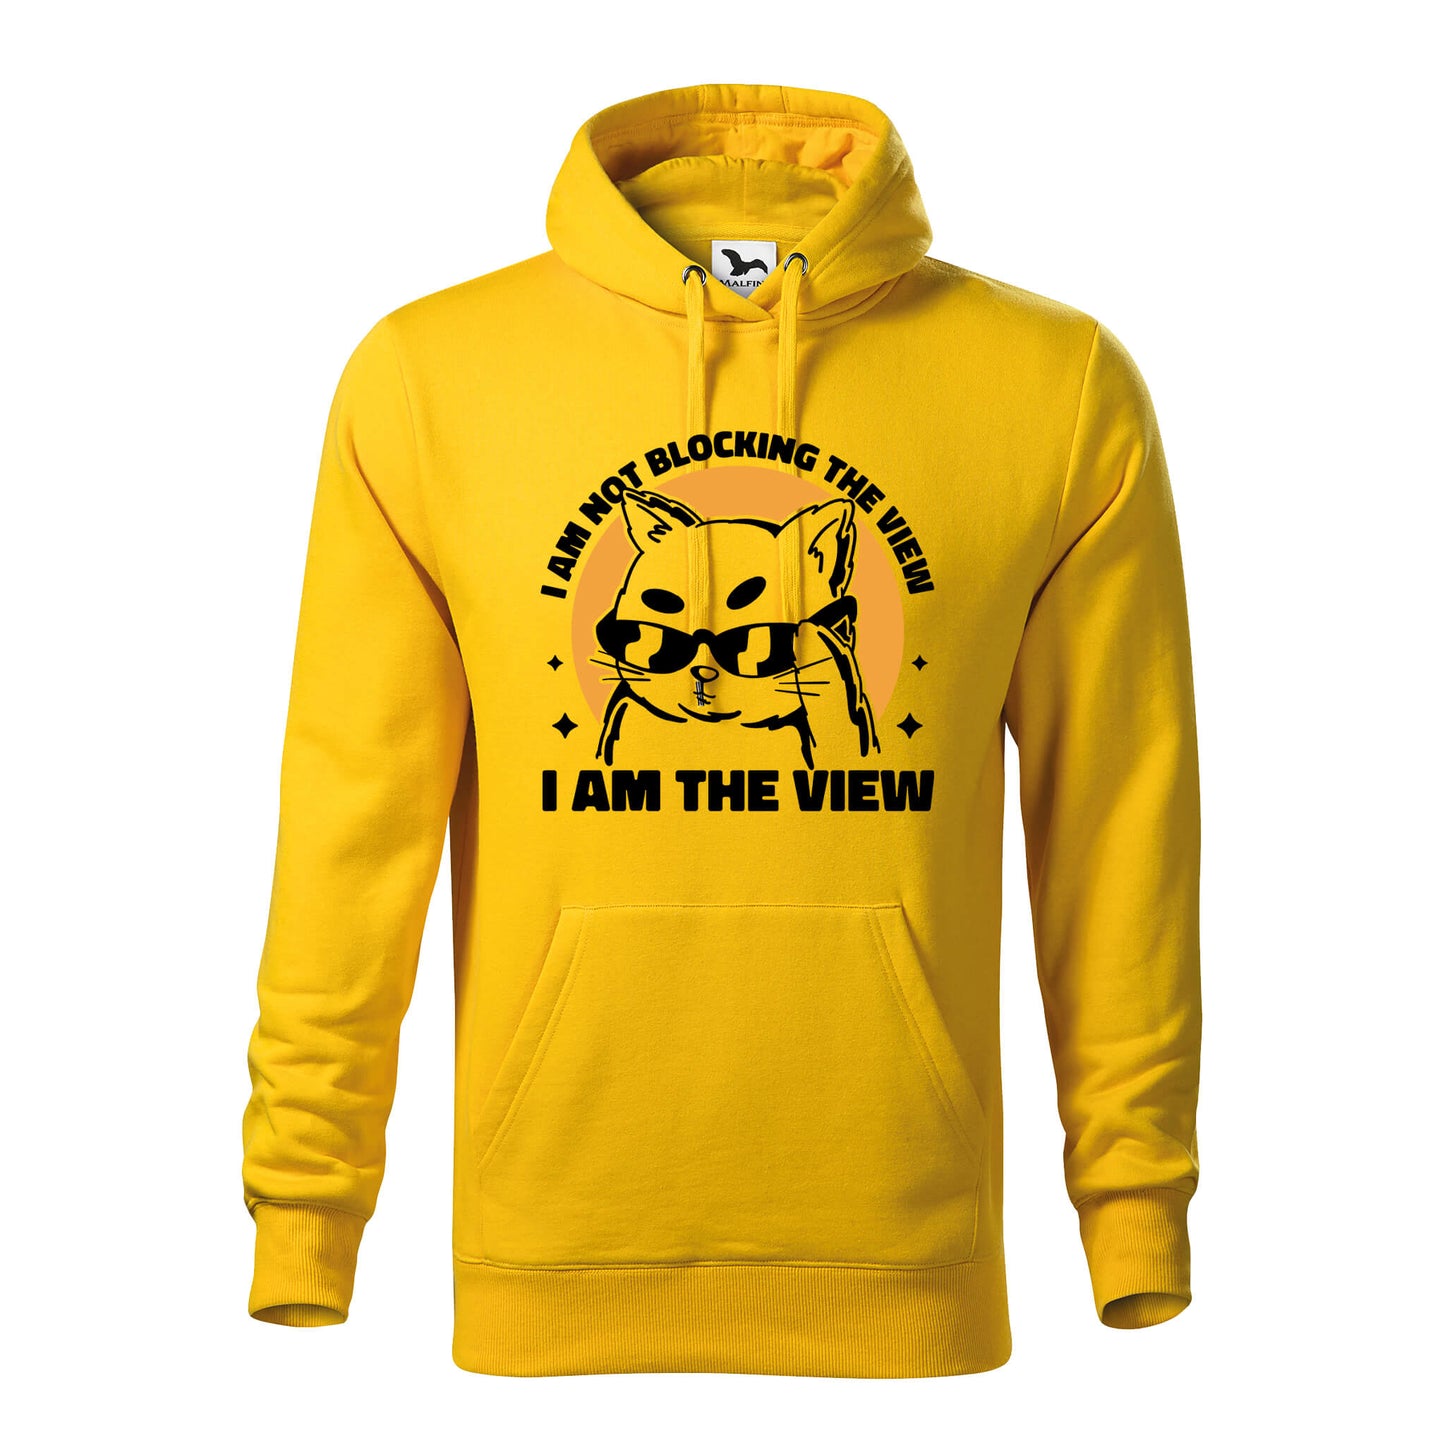 I am the view hoodie - rvdesignprint